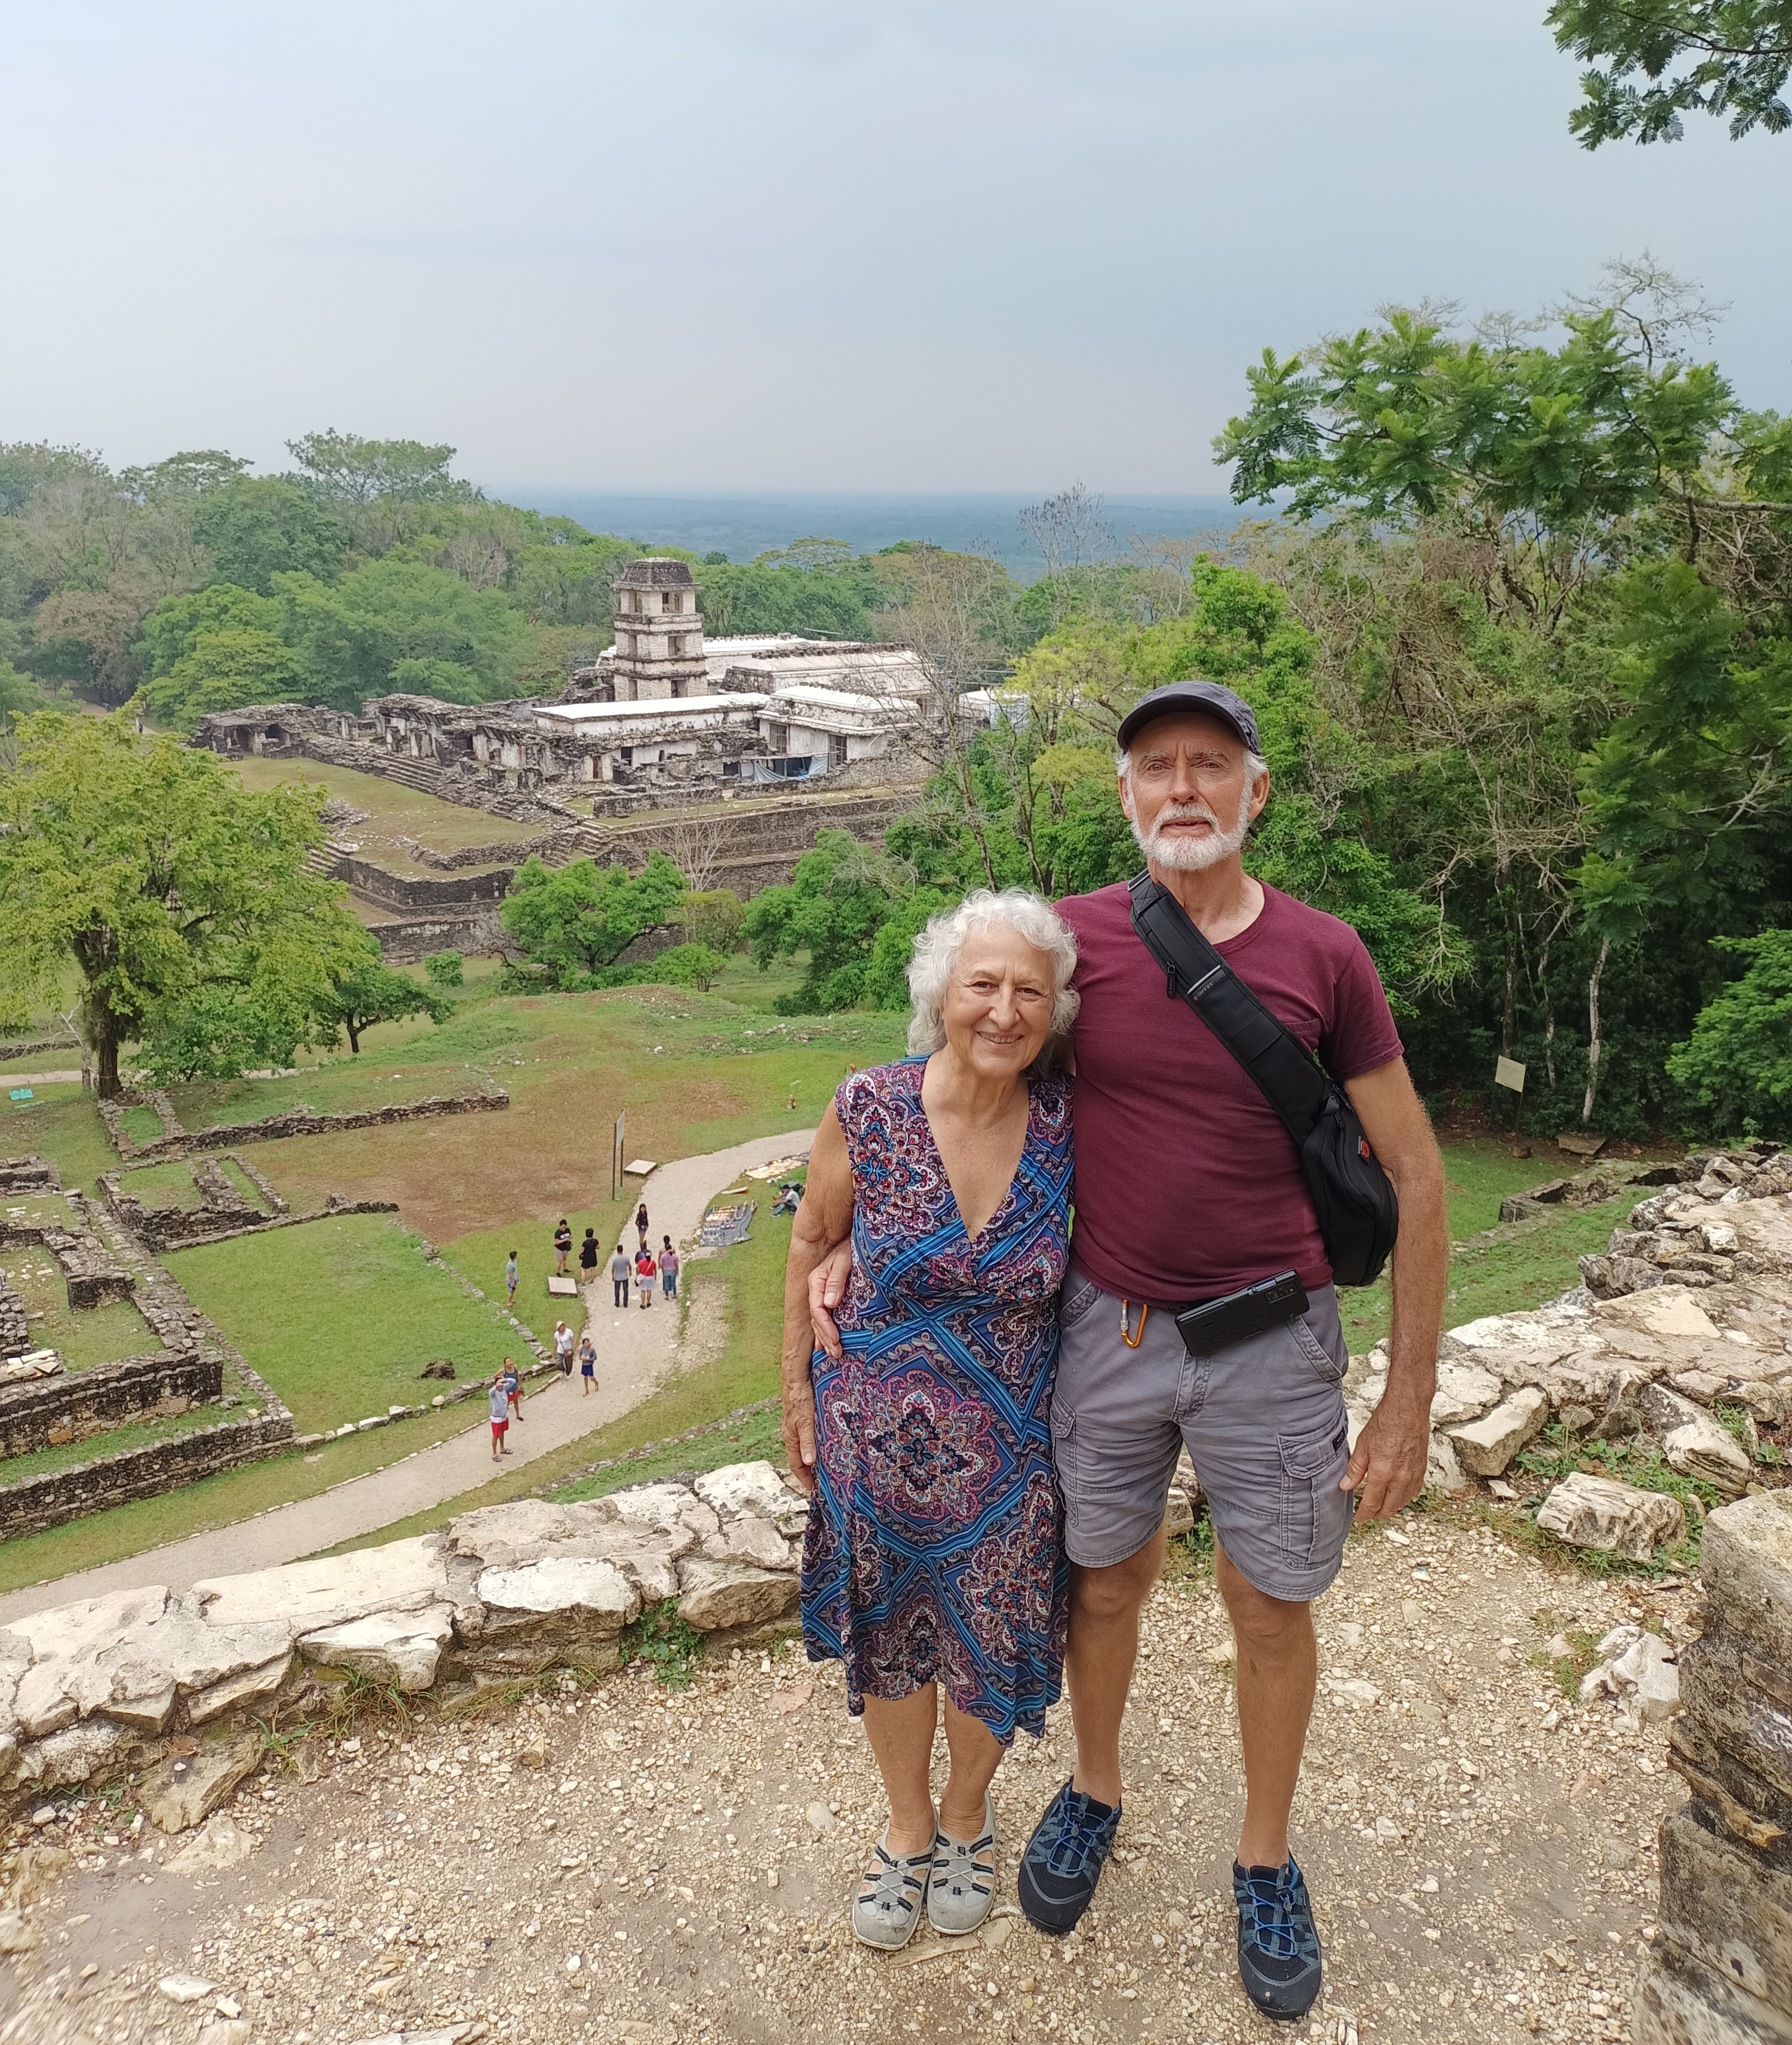 Carolyn and Robert with the observatory at Palenque in the background.